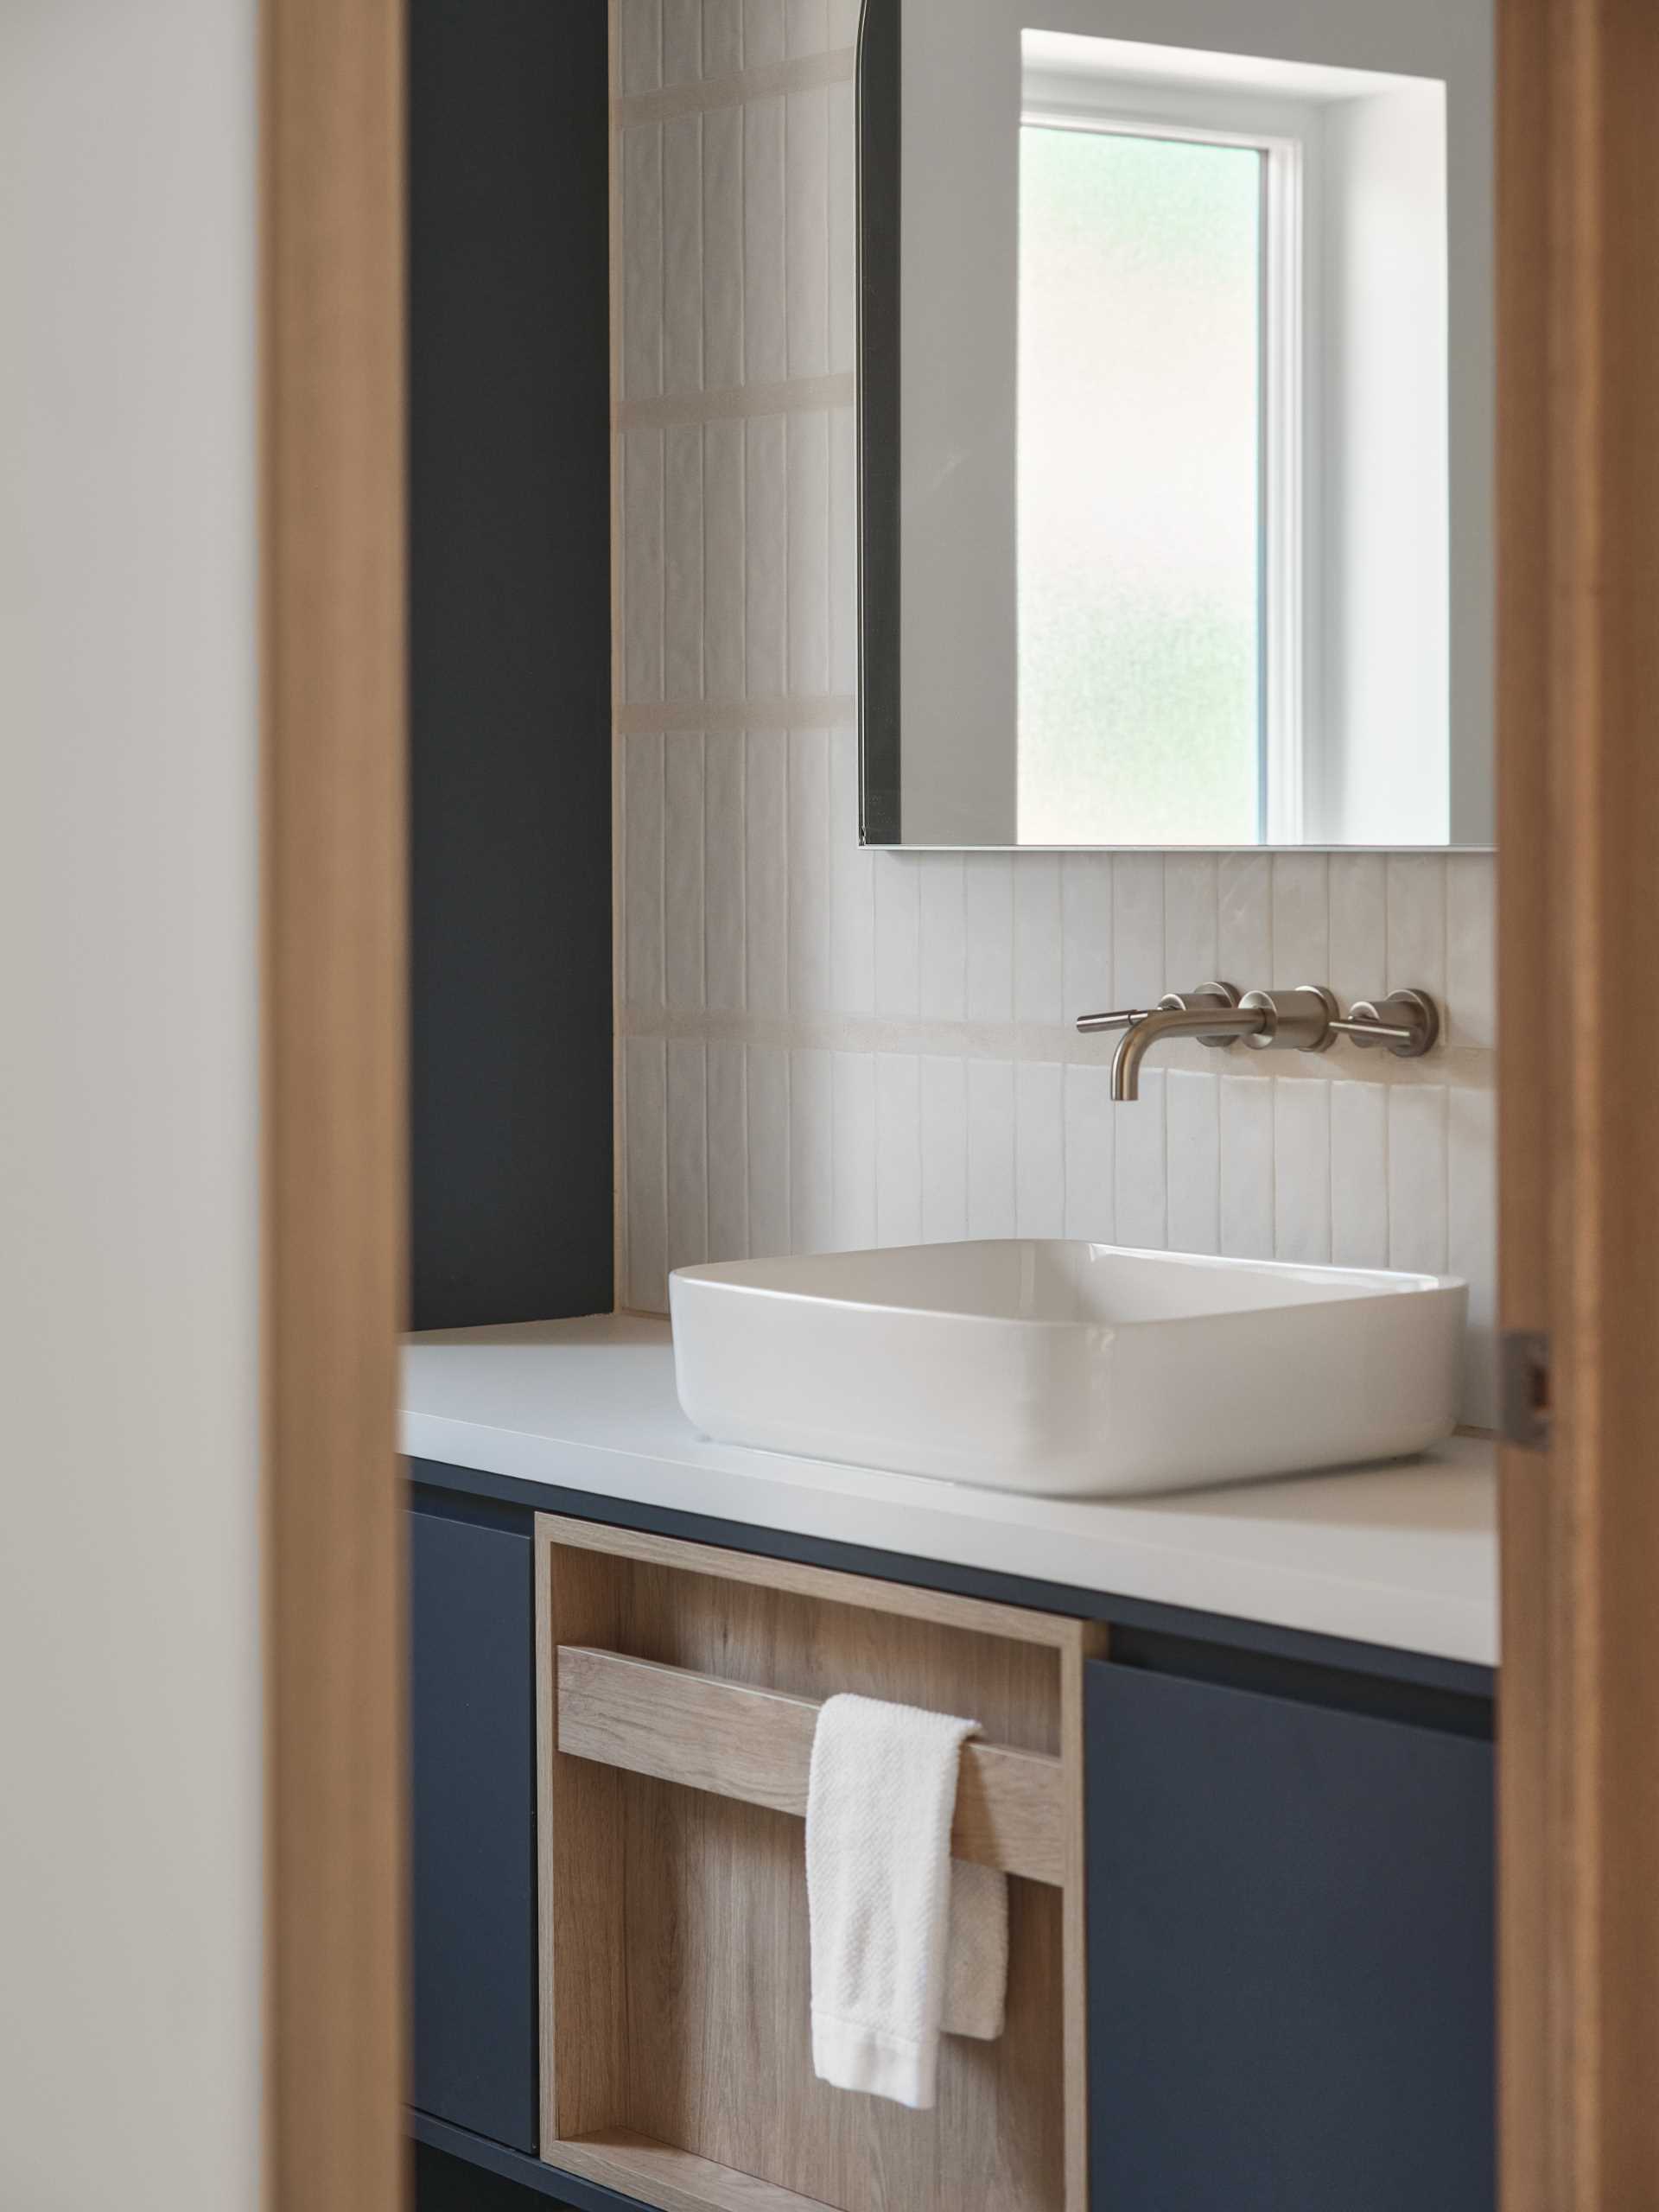 In this modern bathroom, a dark vanity matches the dark wall, while white tiles provide a backdrop for the mirror.